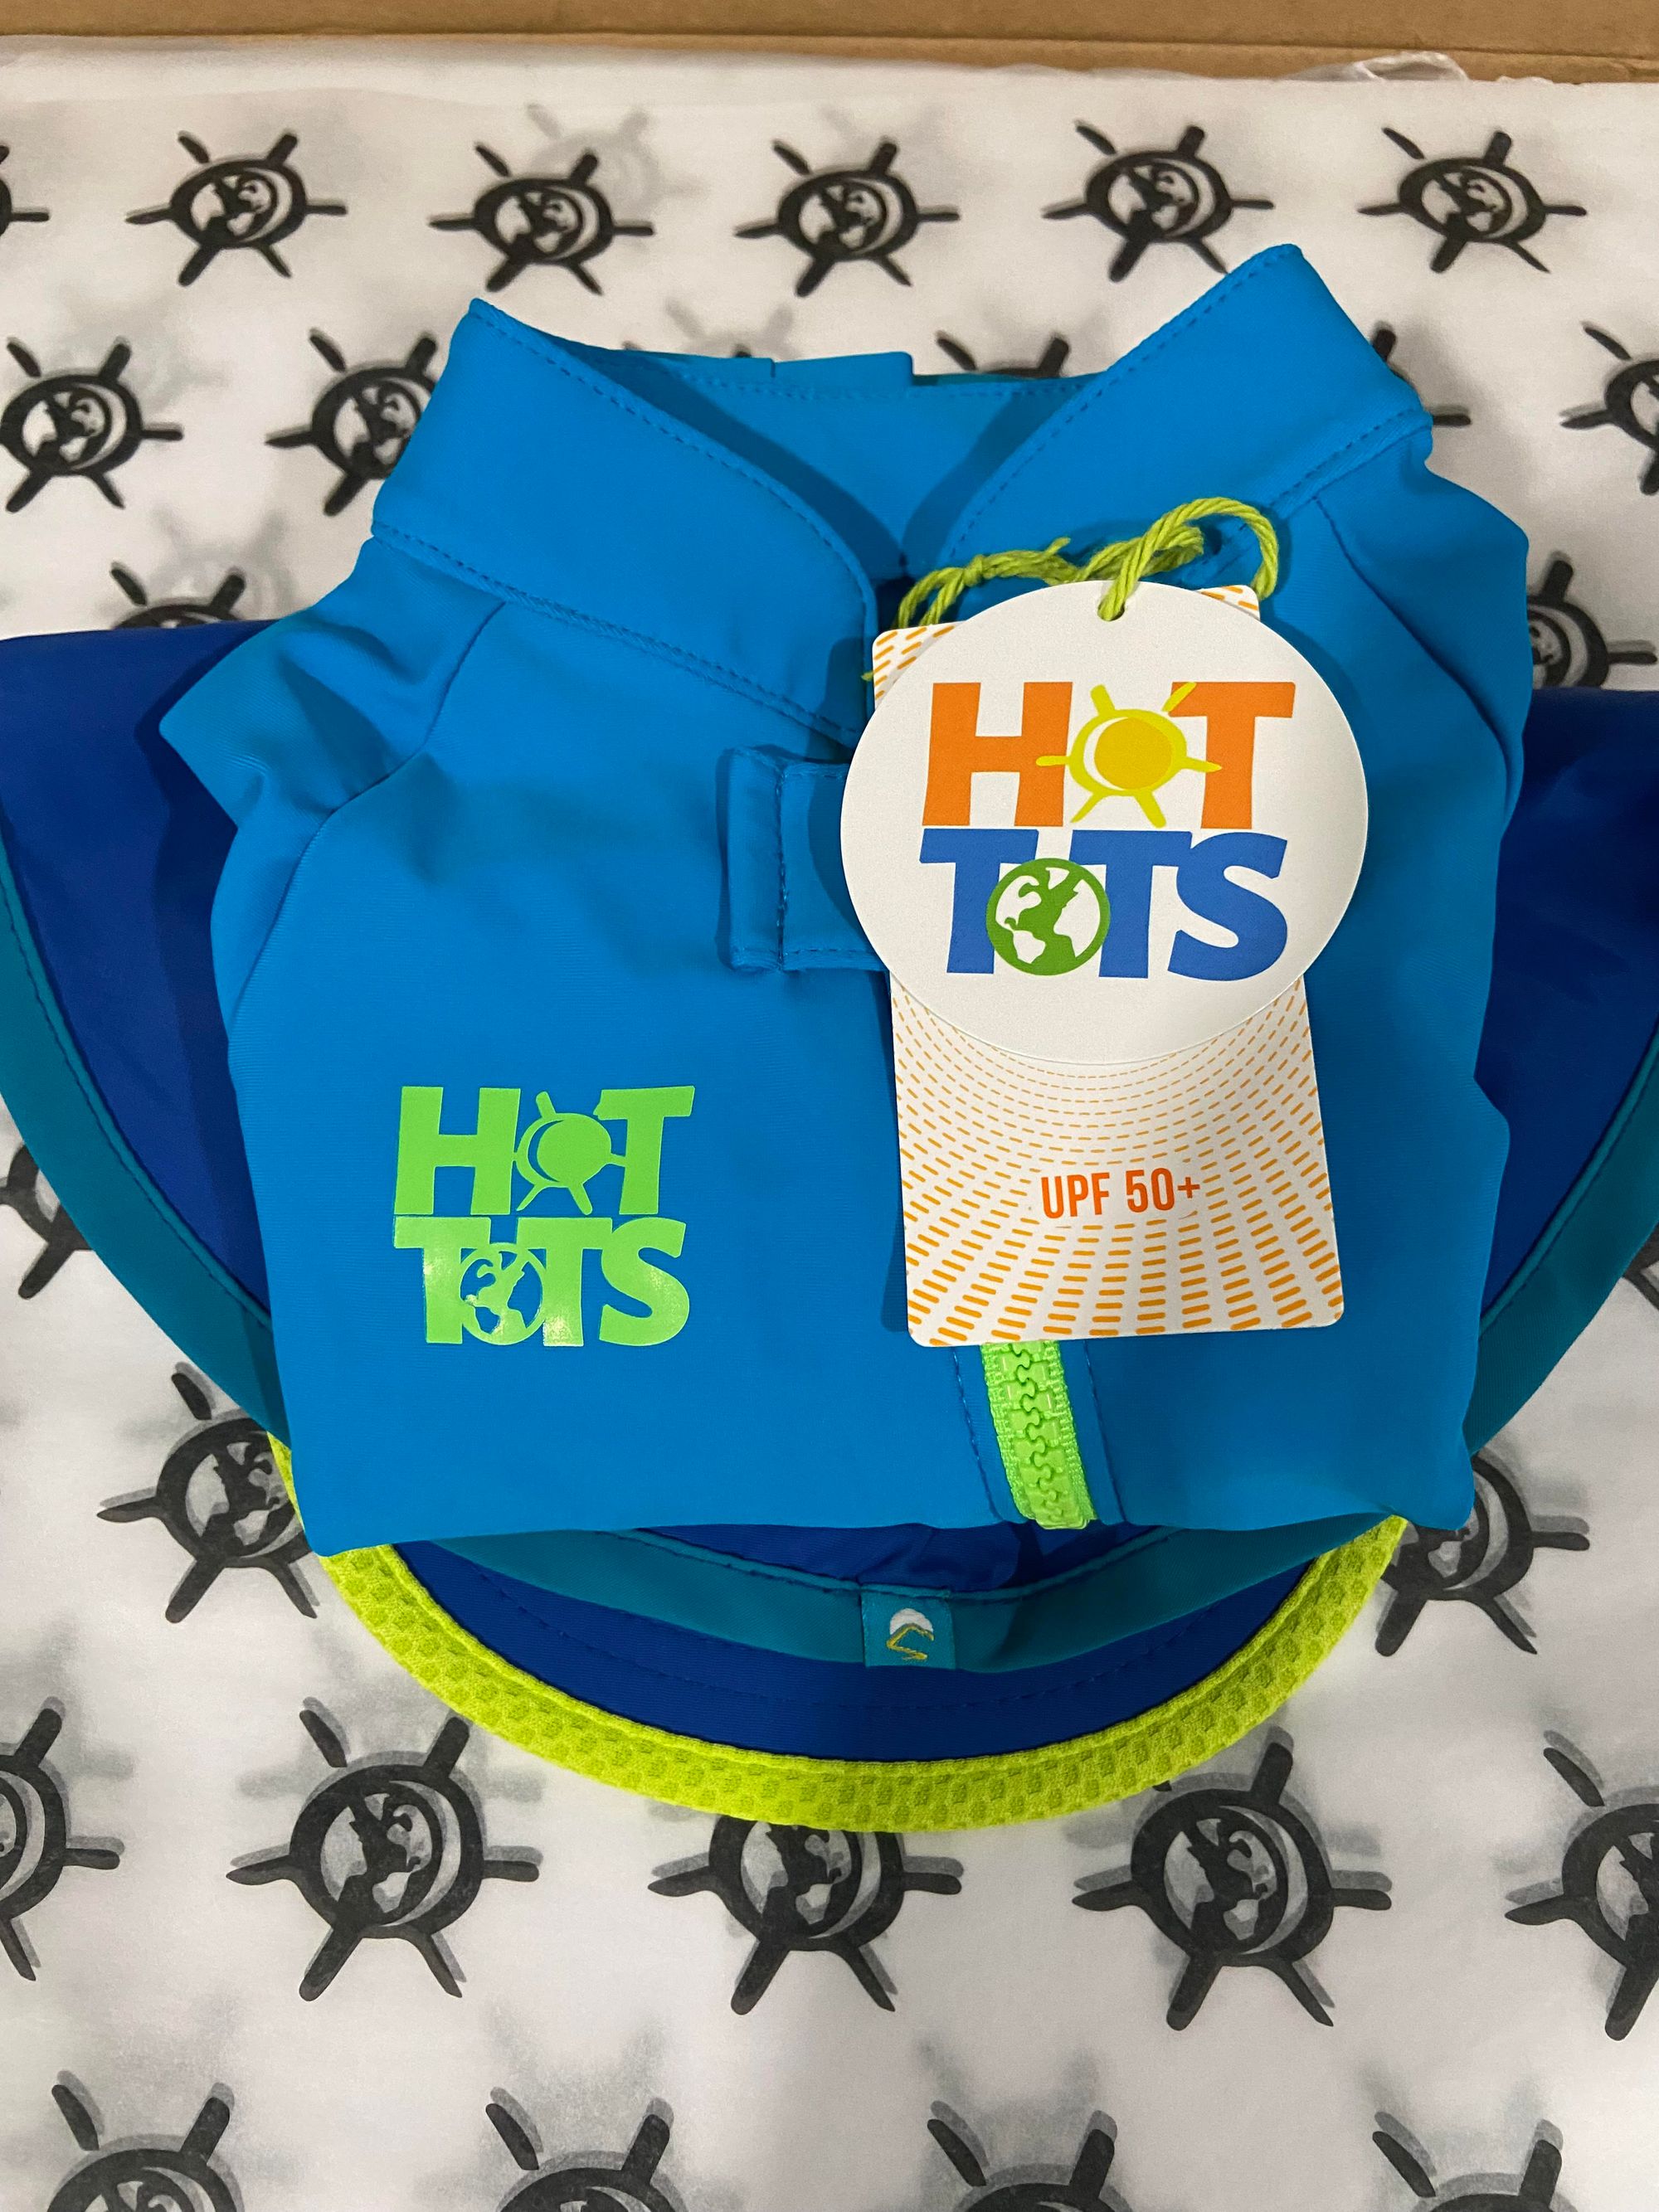 Hot Tots: Easy-use, Earth-friendly Outdoor Clothing For Every Kid